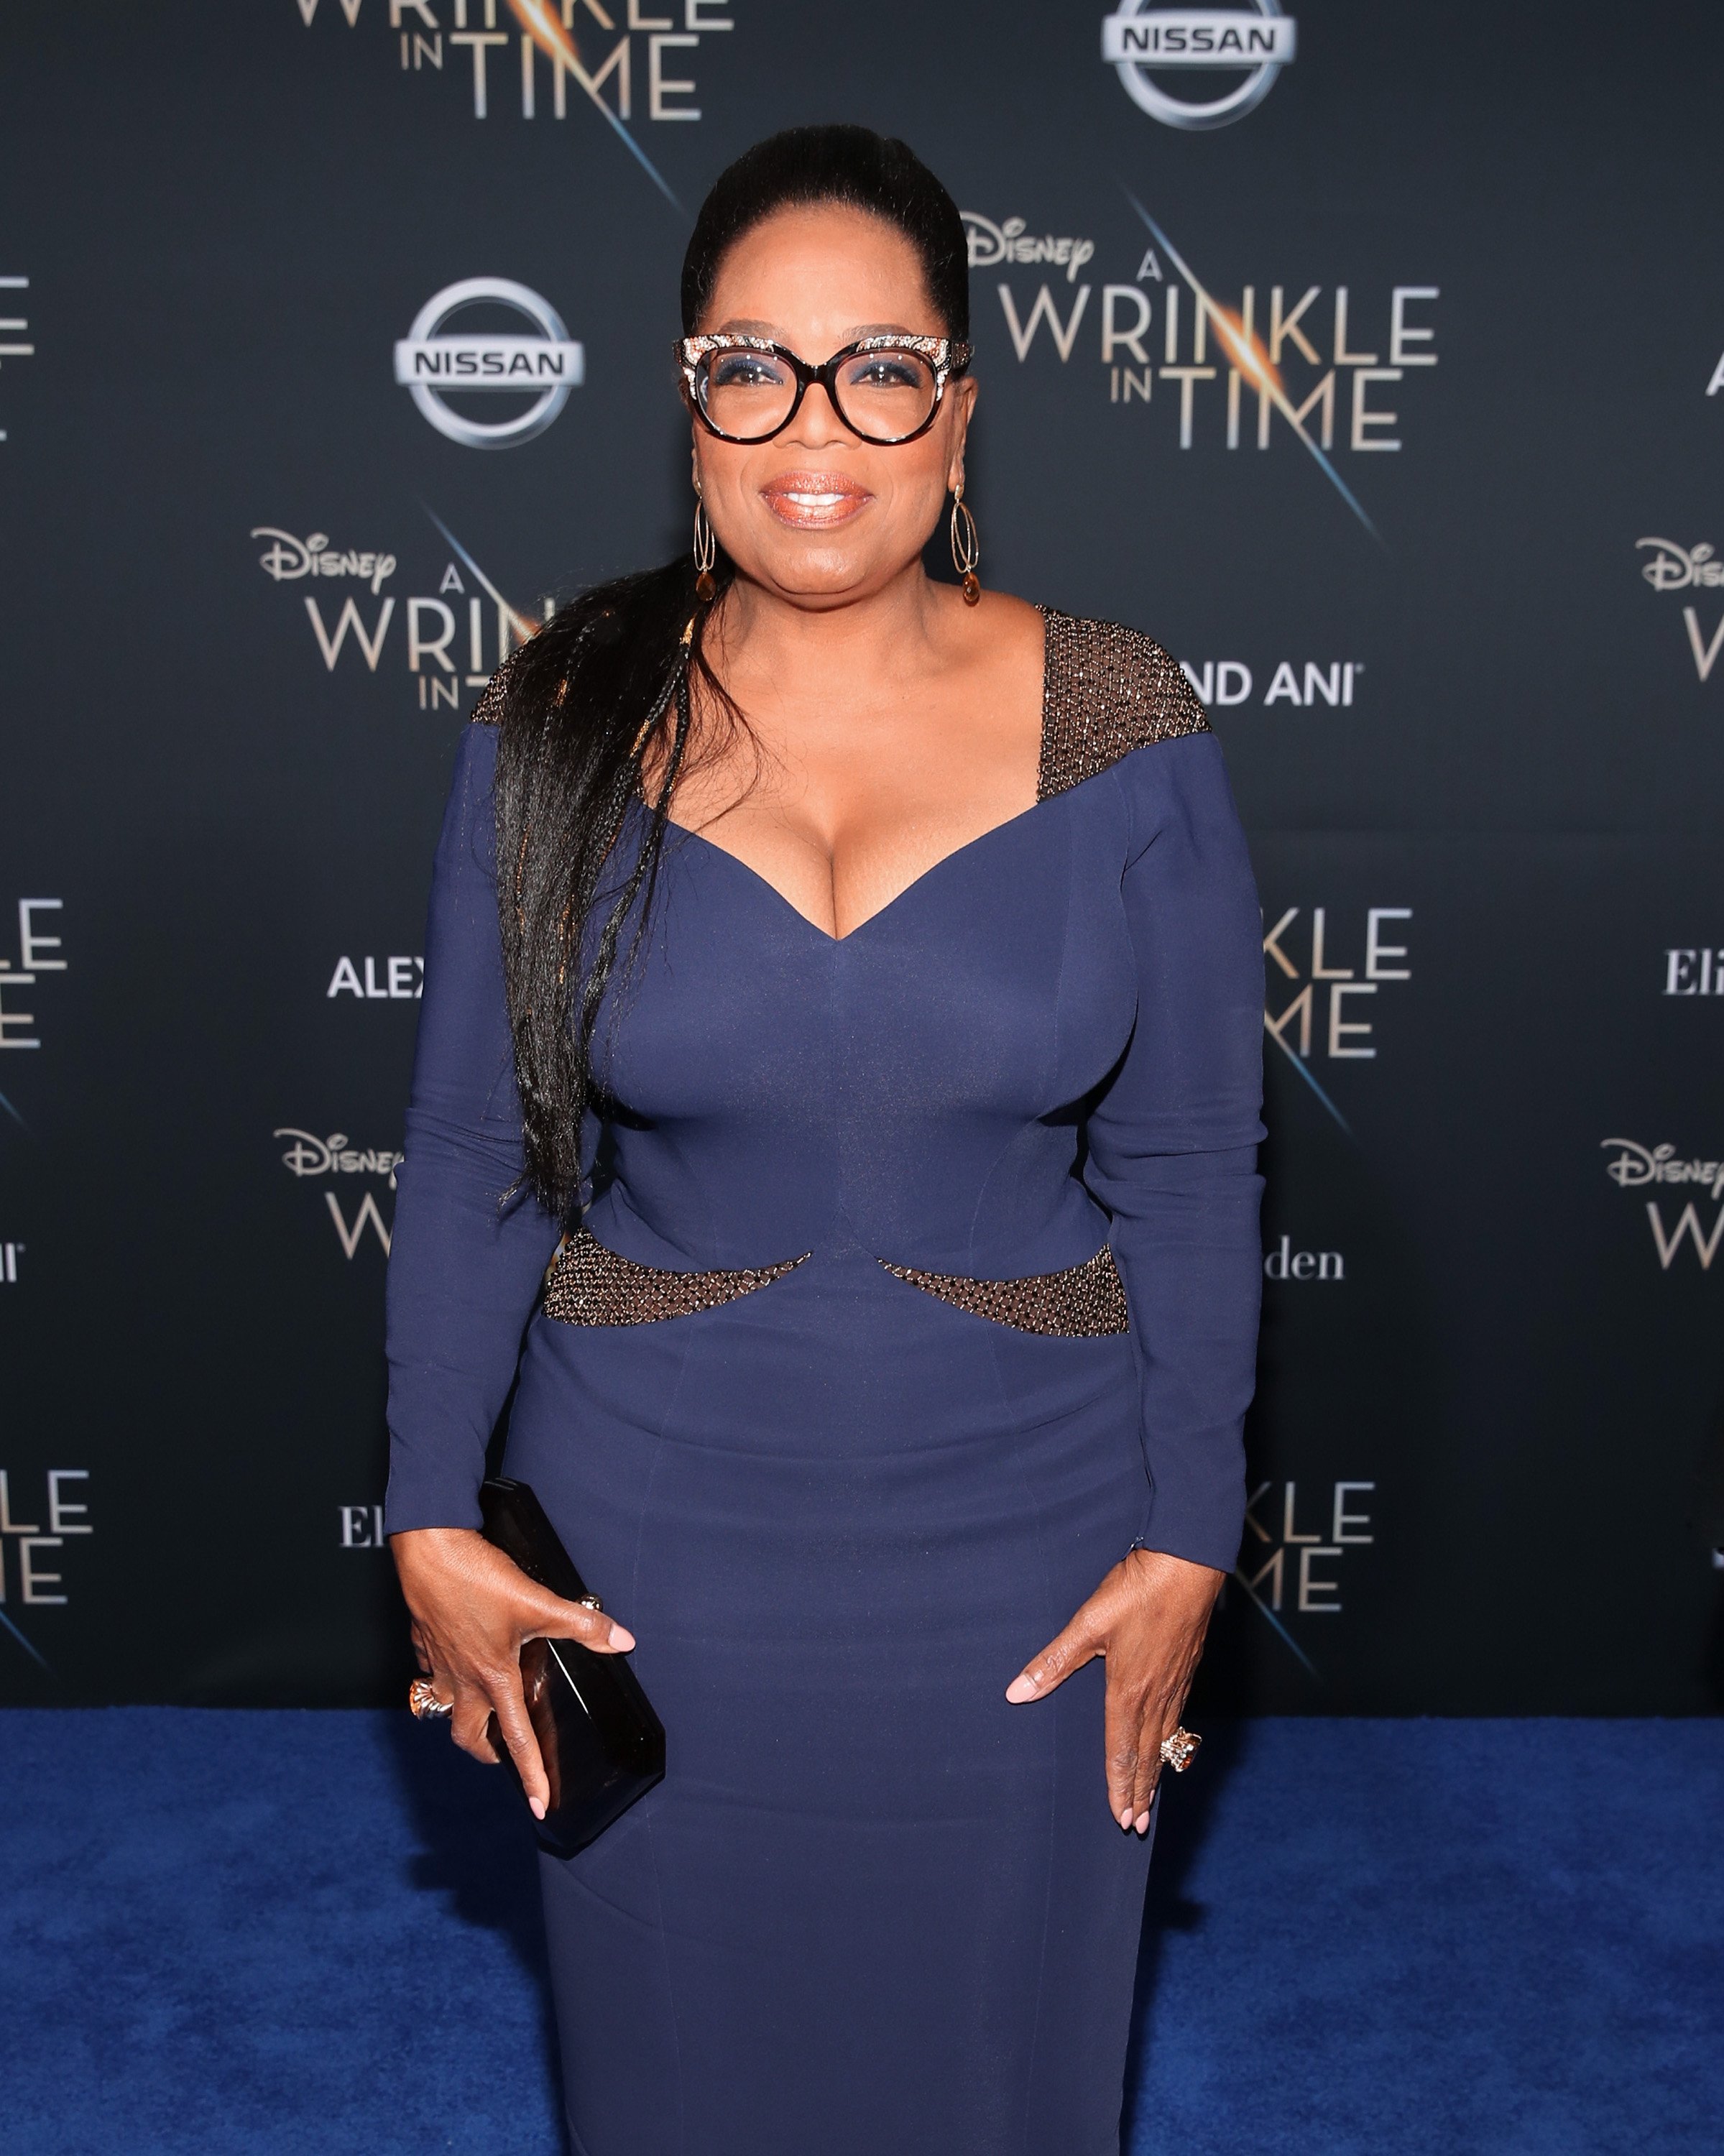 Oprah Winfrey attending the premiere of "A Wrinkle In Time." | Photo: Getty Images